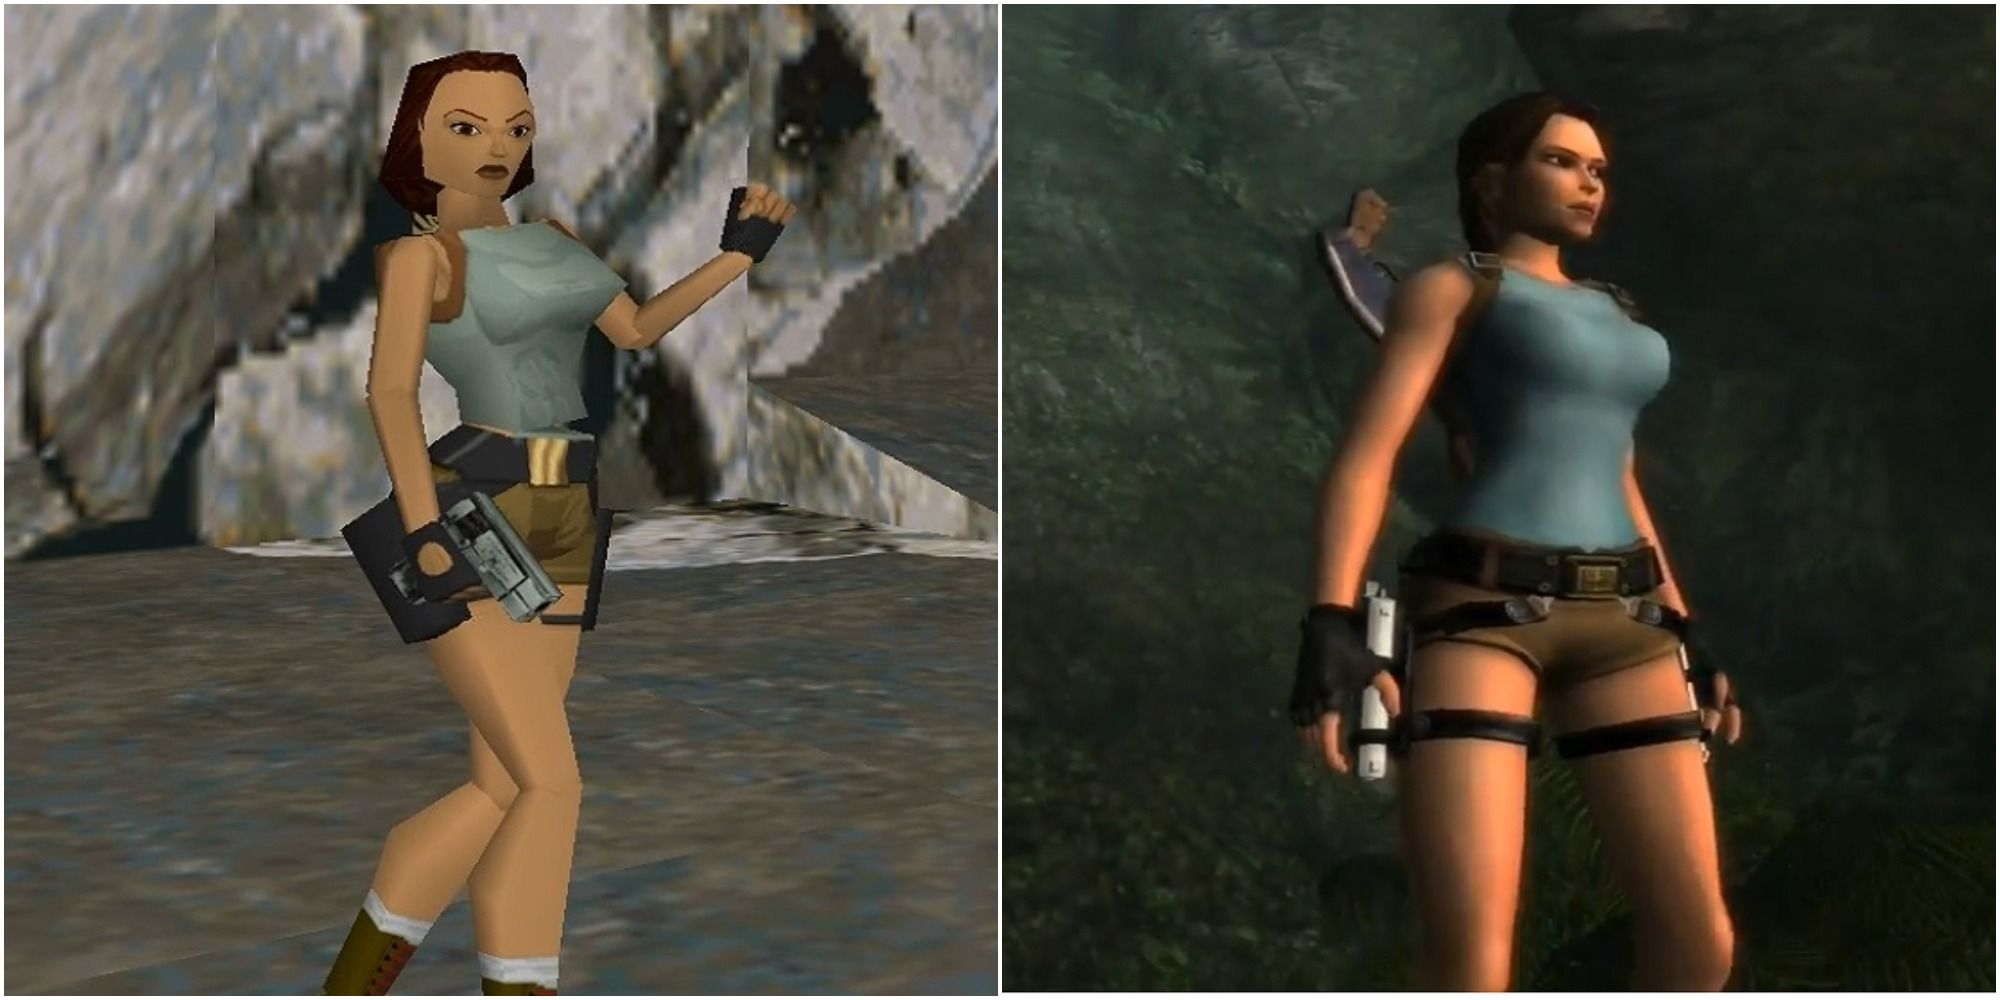 Lara Croft's in game models in Tomb Raider and Anniversary